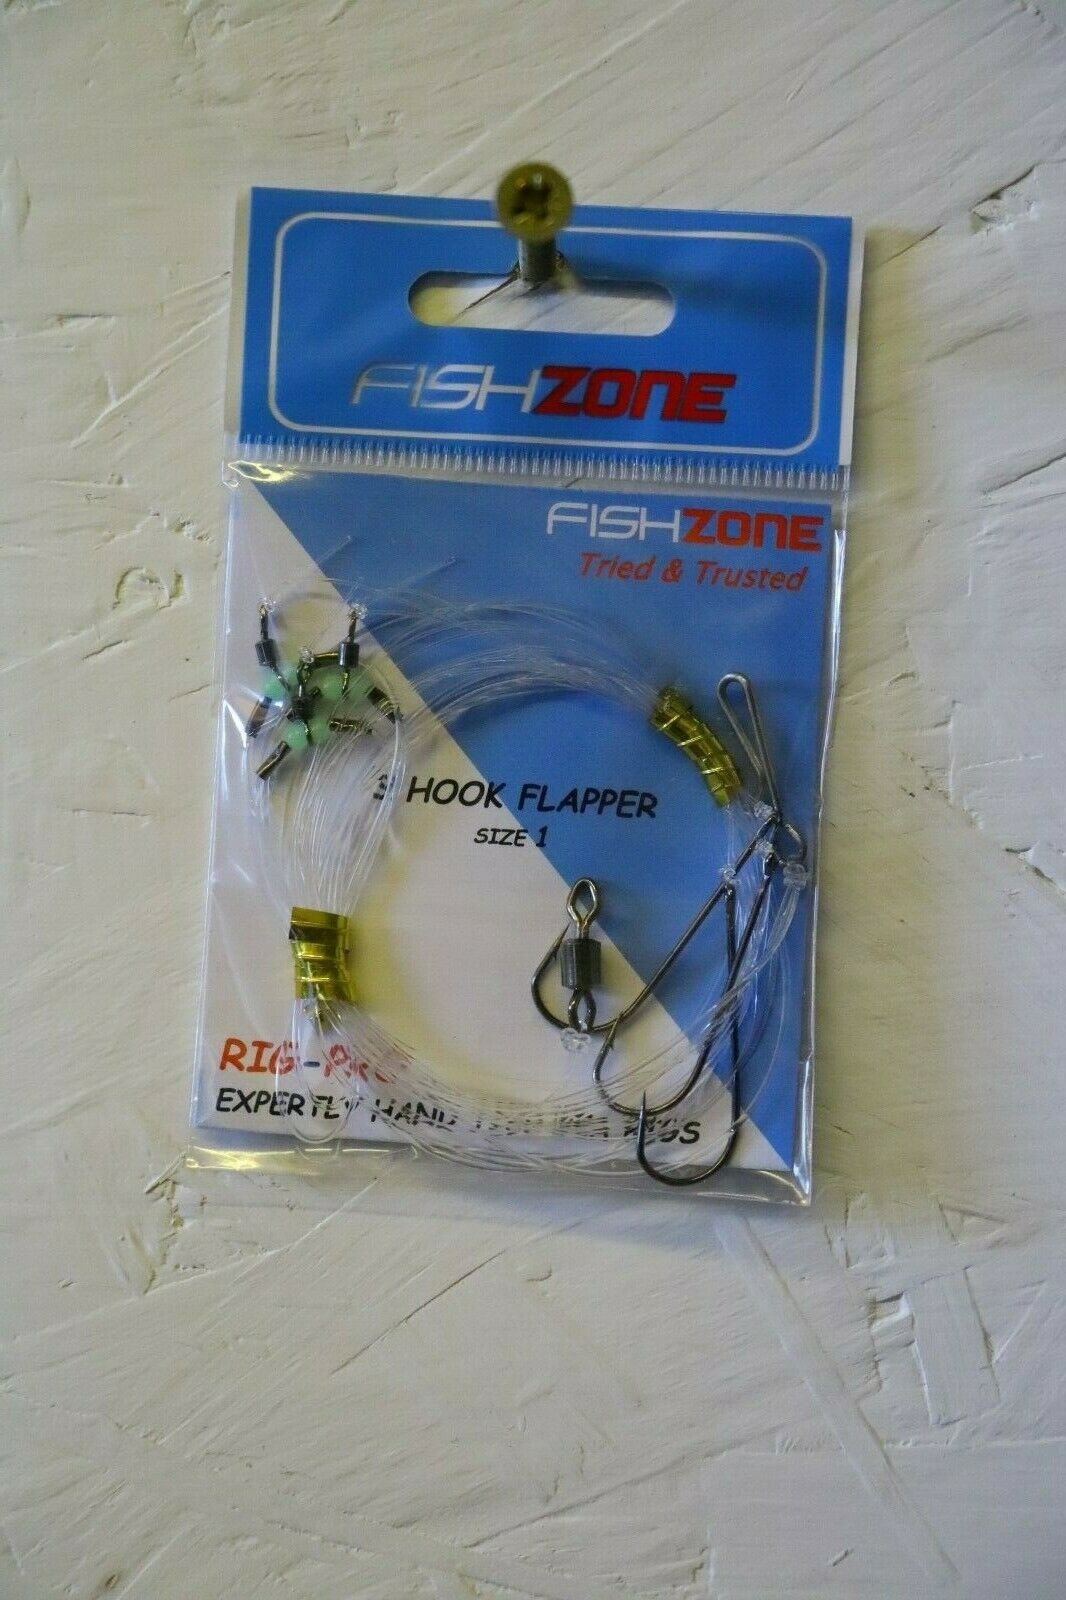 FishZone 3 hook flapper size 1 scratching rig sea fishing rig